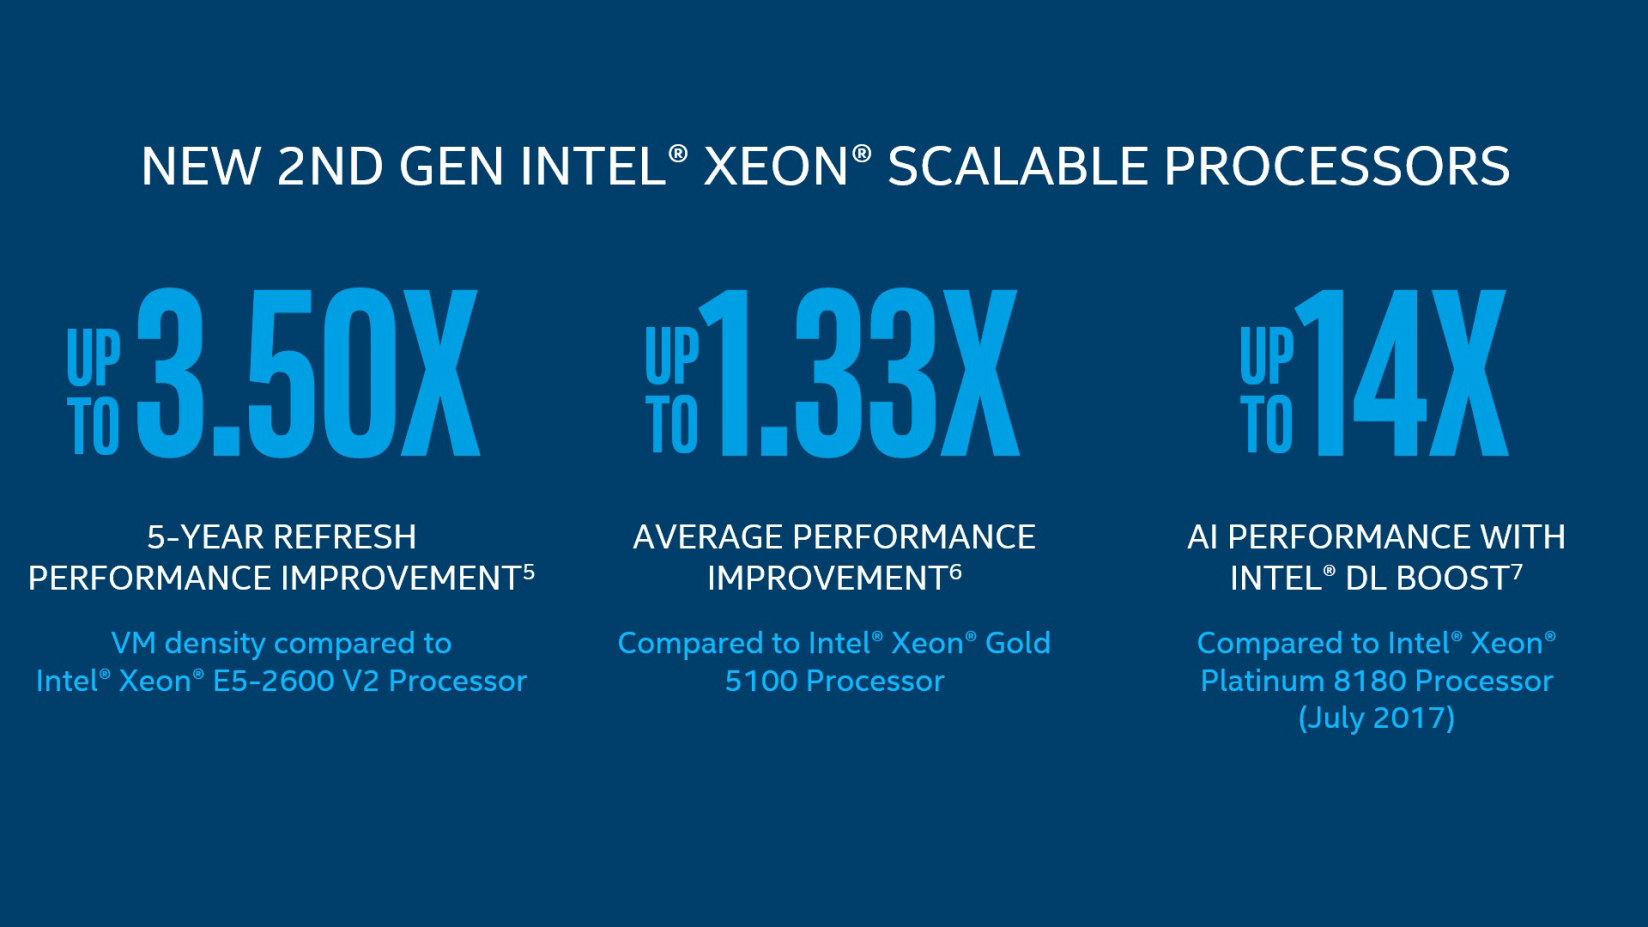 Performance claims of 2nd Gen Intel® Xeon® Scalable processors